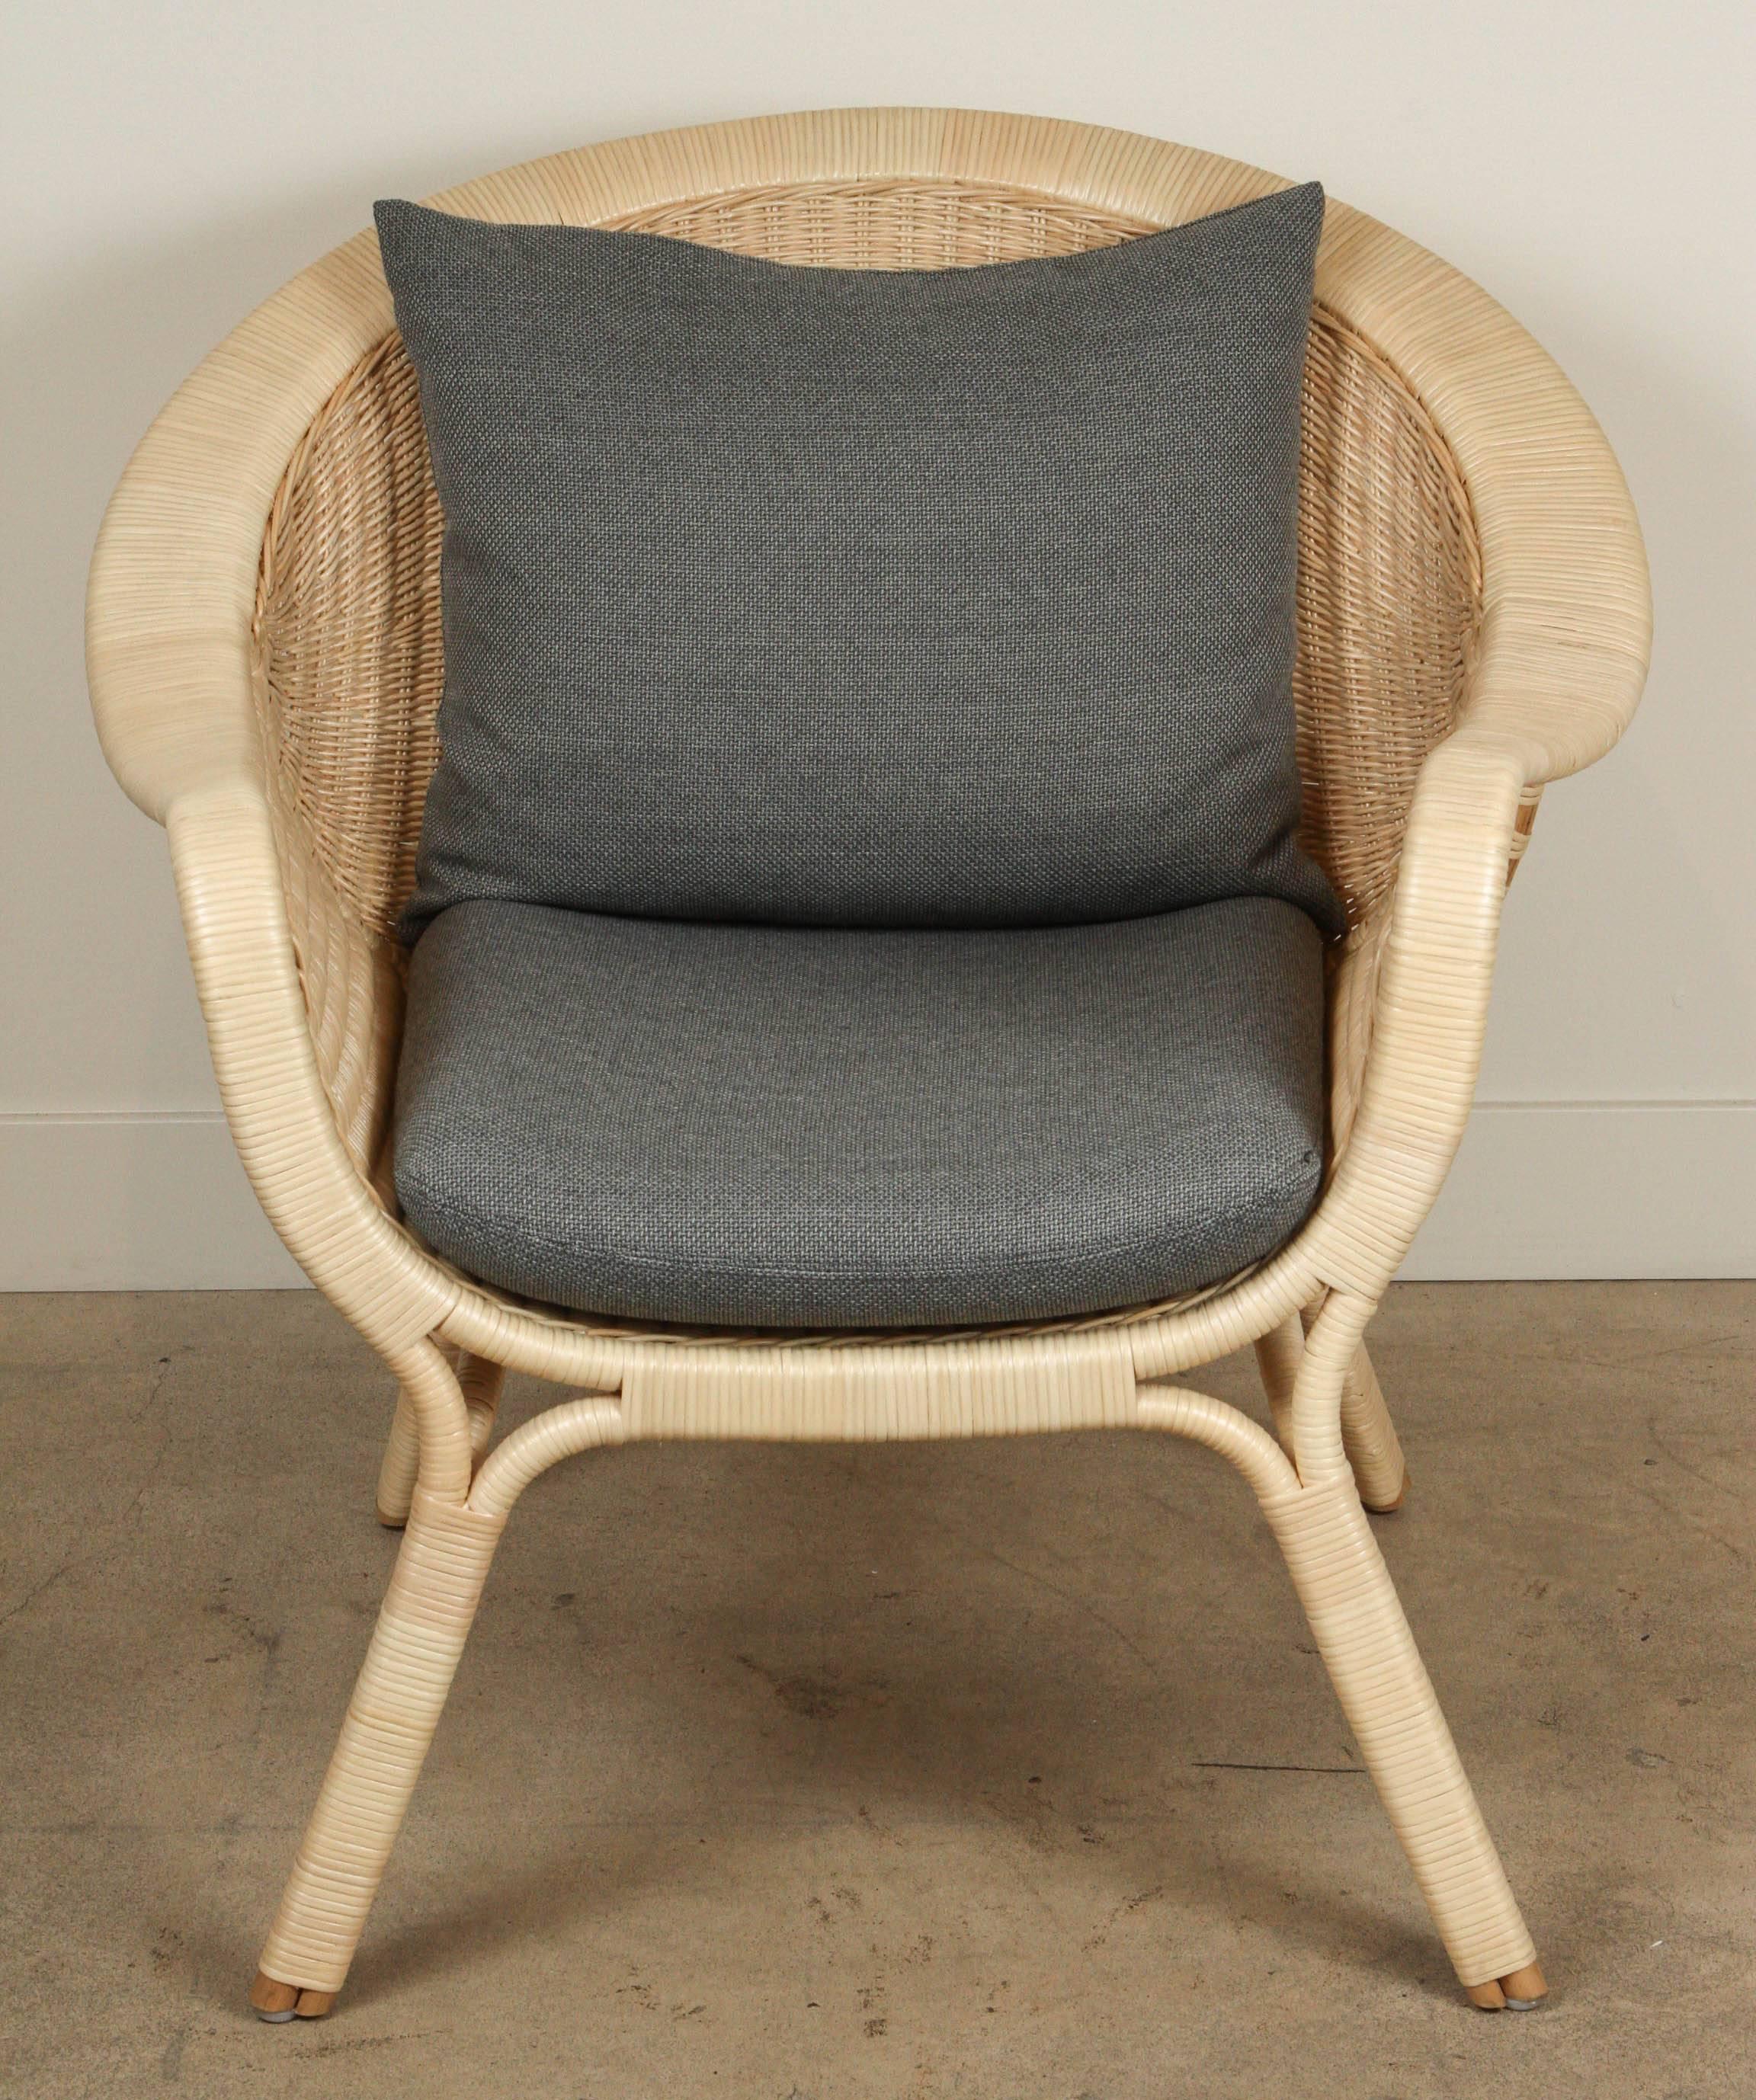 Madame chair by Nanna & Jørgen Ditzel. Original design from 1951. Current production by Sika Designs in Denmark.